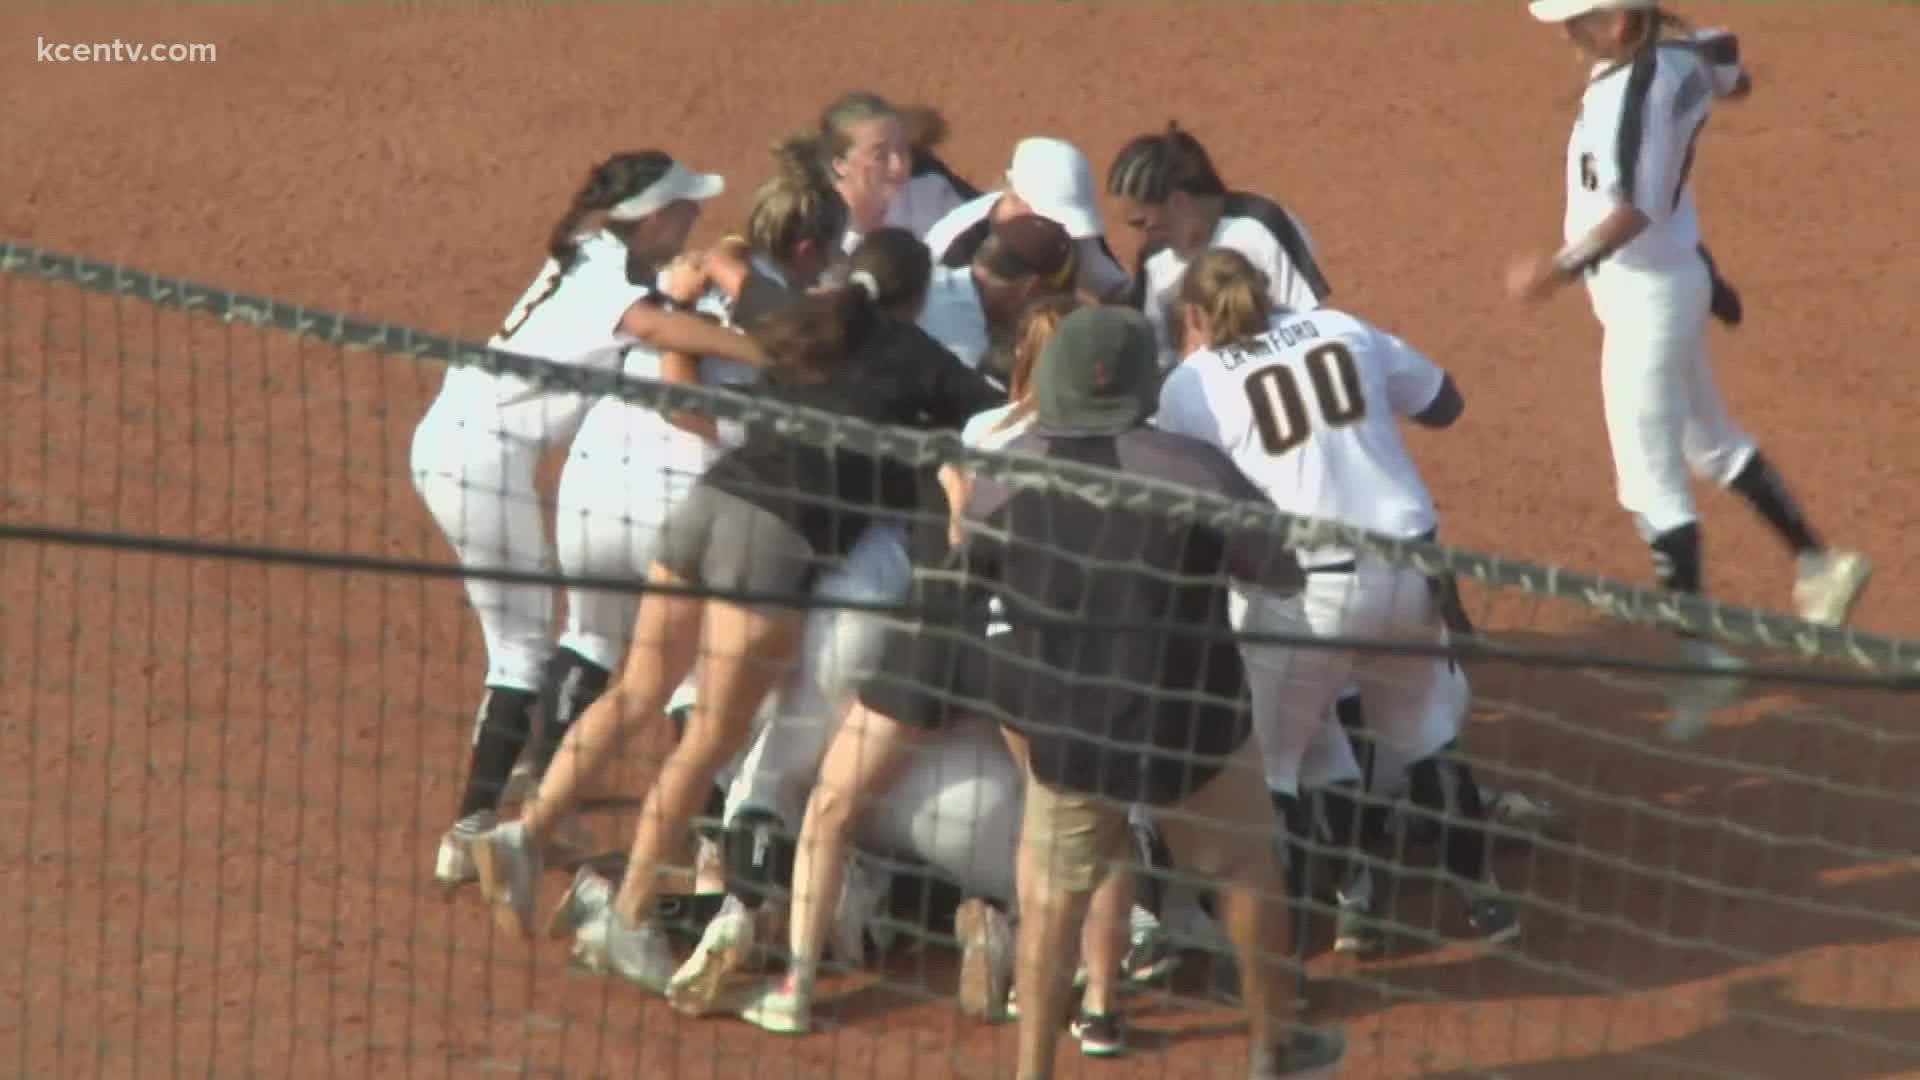 The Lady Pirates will play for their fourth state title in Austin this week.